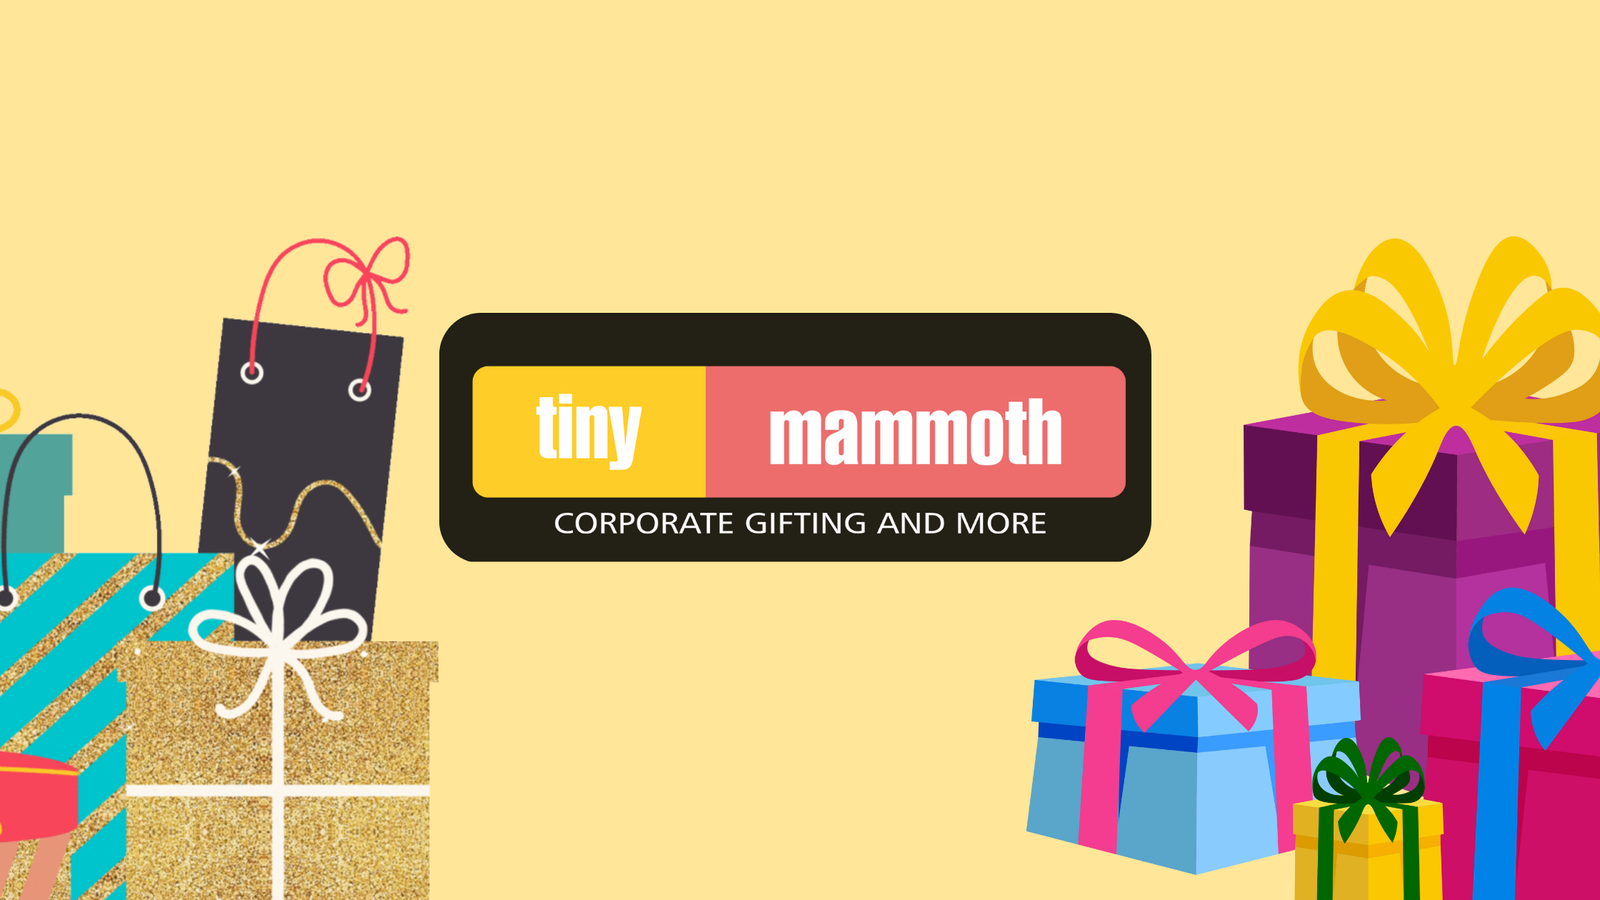 What does corporate gifting mean? by Titan CBG - Issuu